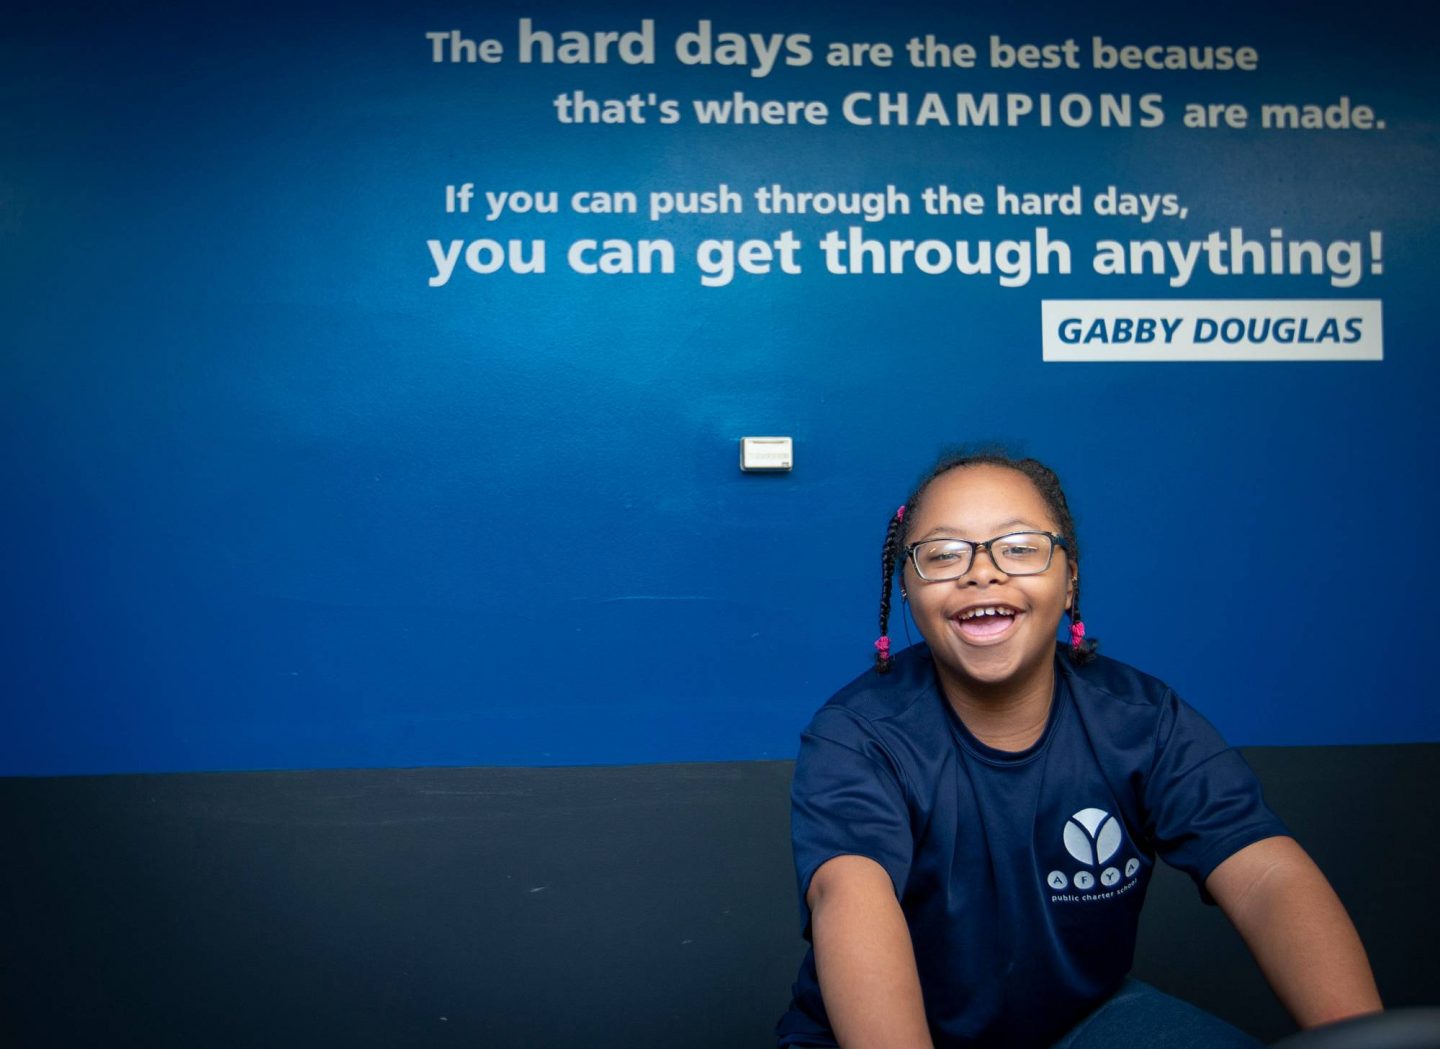 A student rides an exercise bike. A wall behind her includes a quote from Gabby Douglas: "If you can push through the hard days, you can get through anything!"